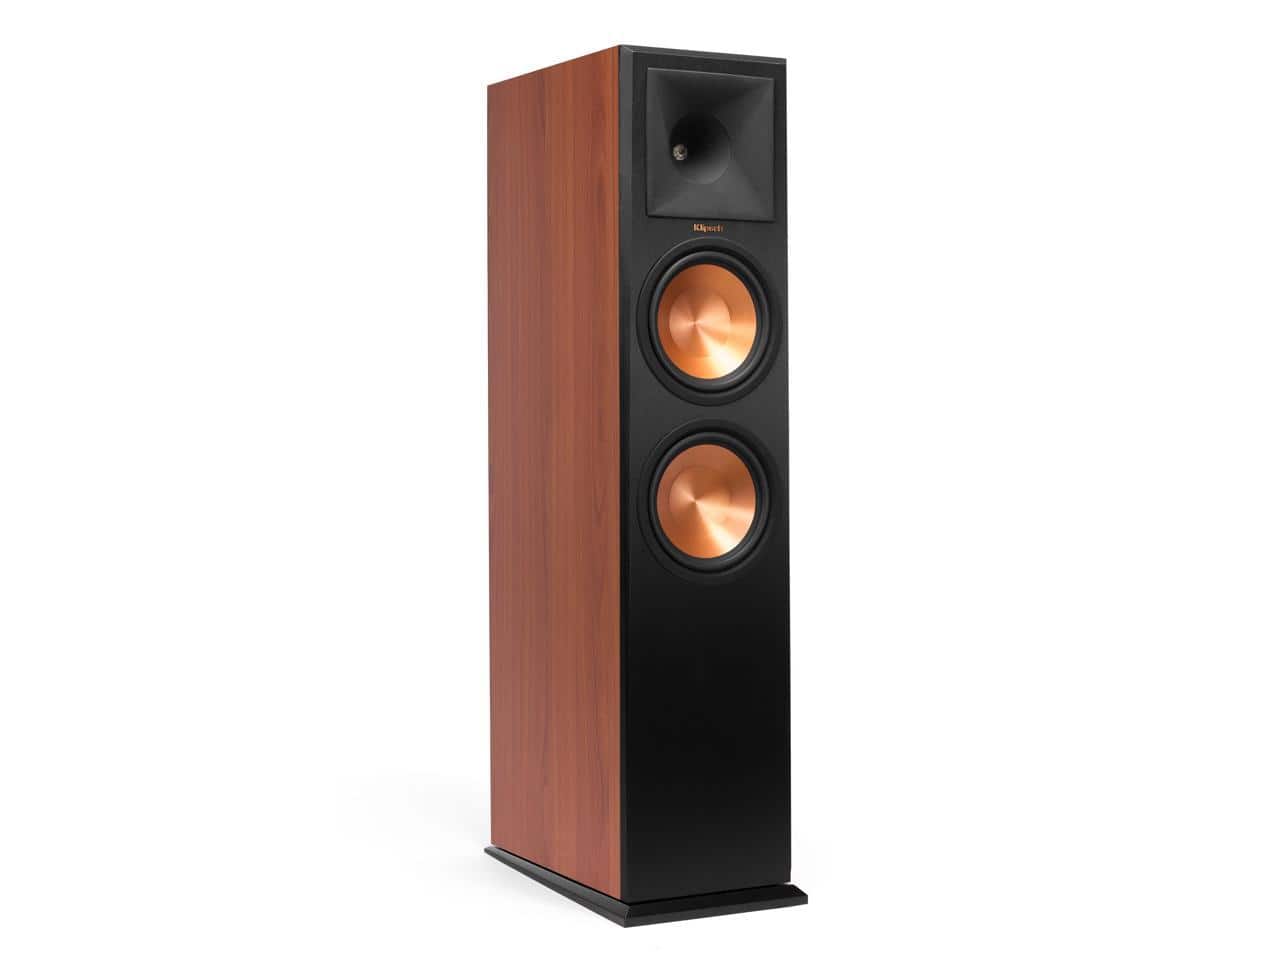 Klipsch Reference Premiere Sale (Cherry): RP-280F $399, RP-260F $349, RP-160M $349, RP-250C $229 + Free Shipping